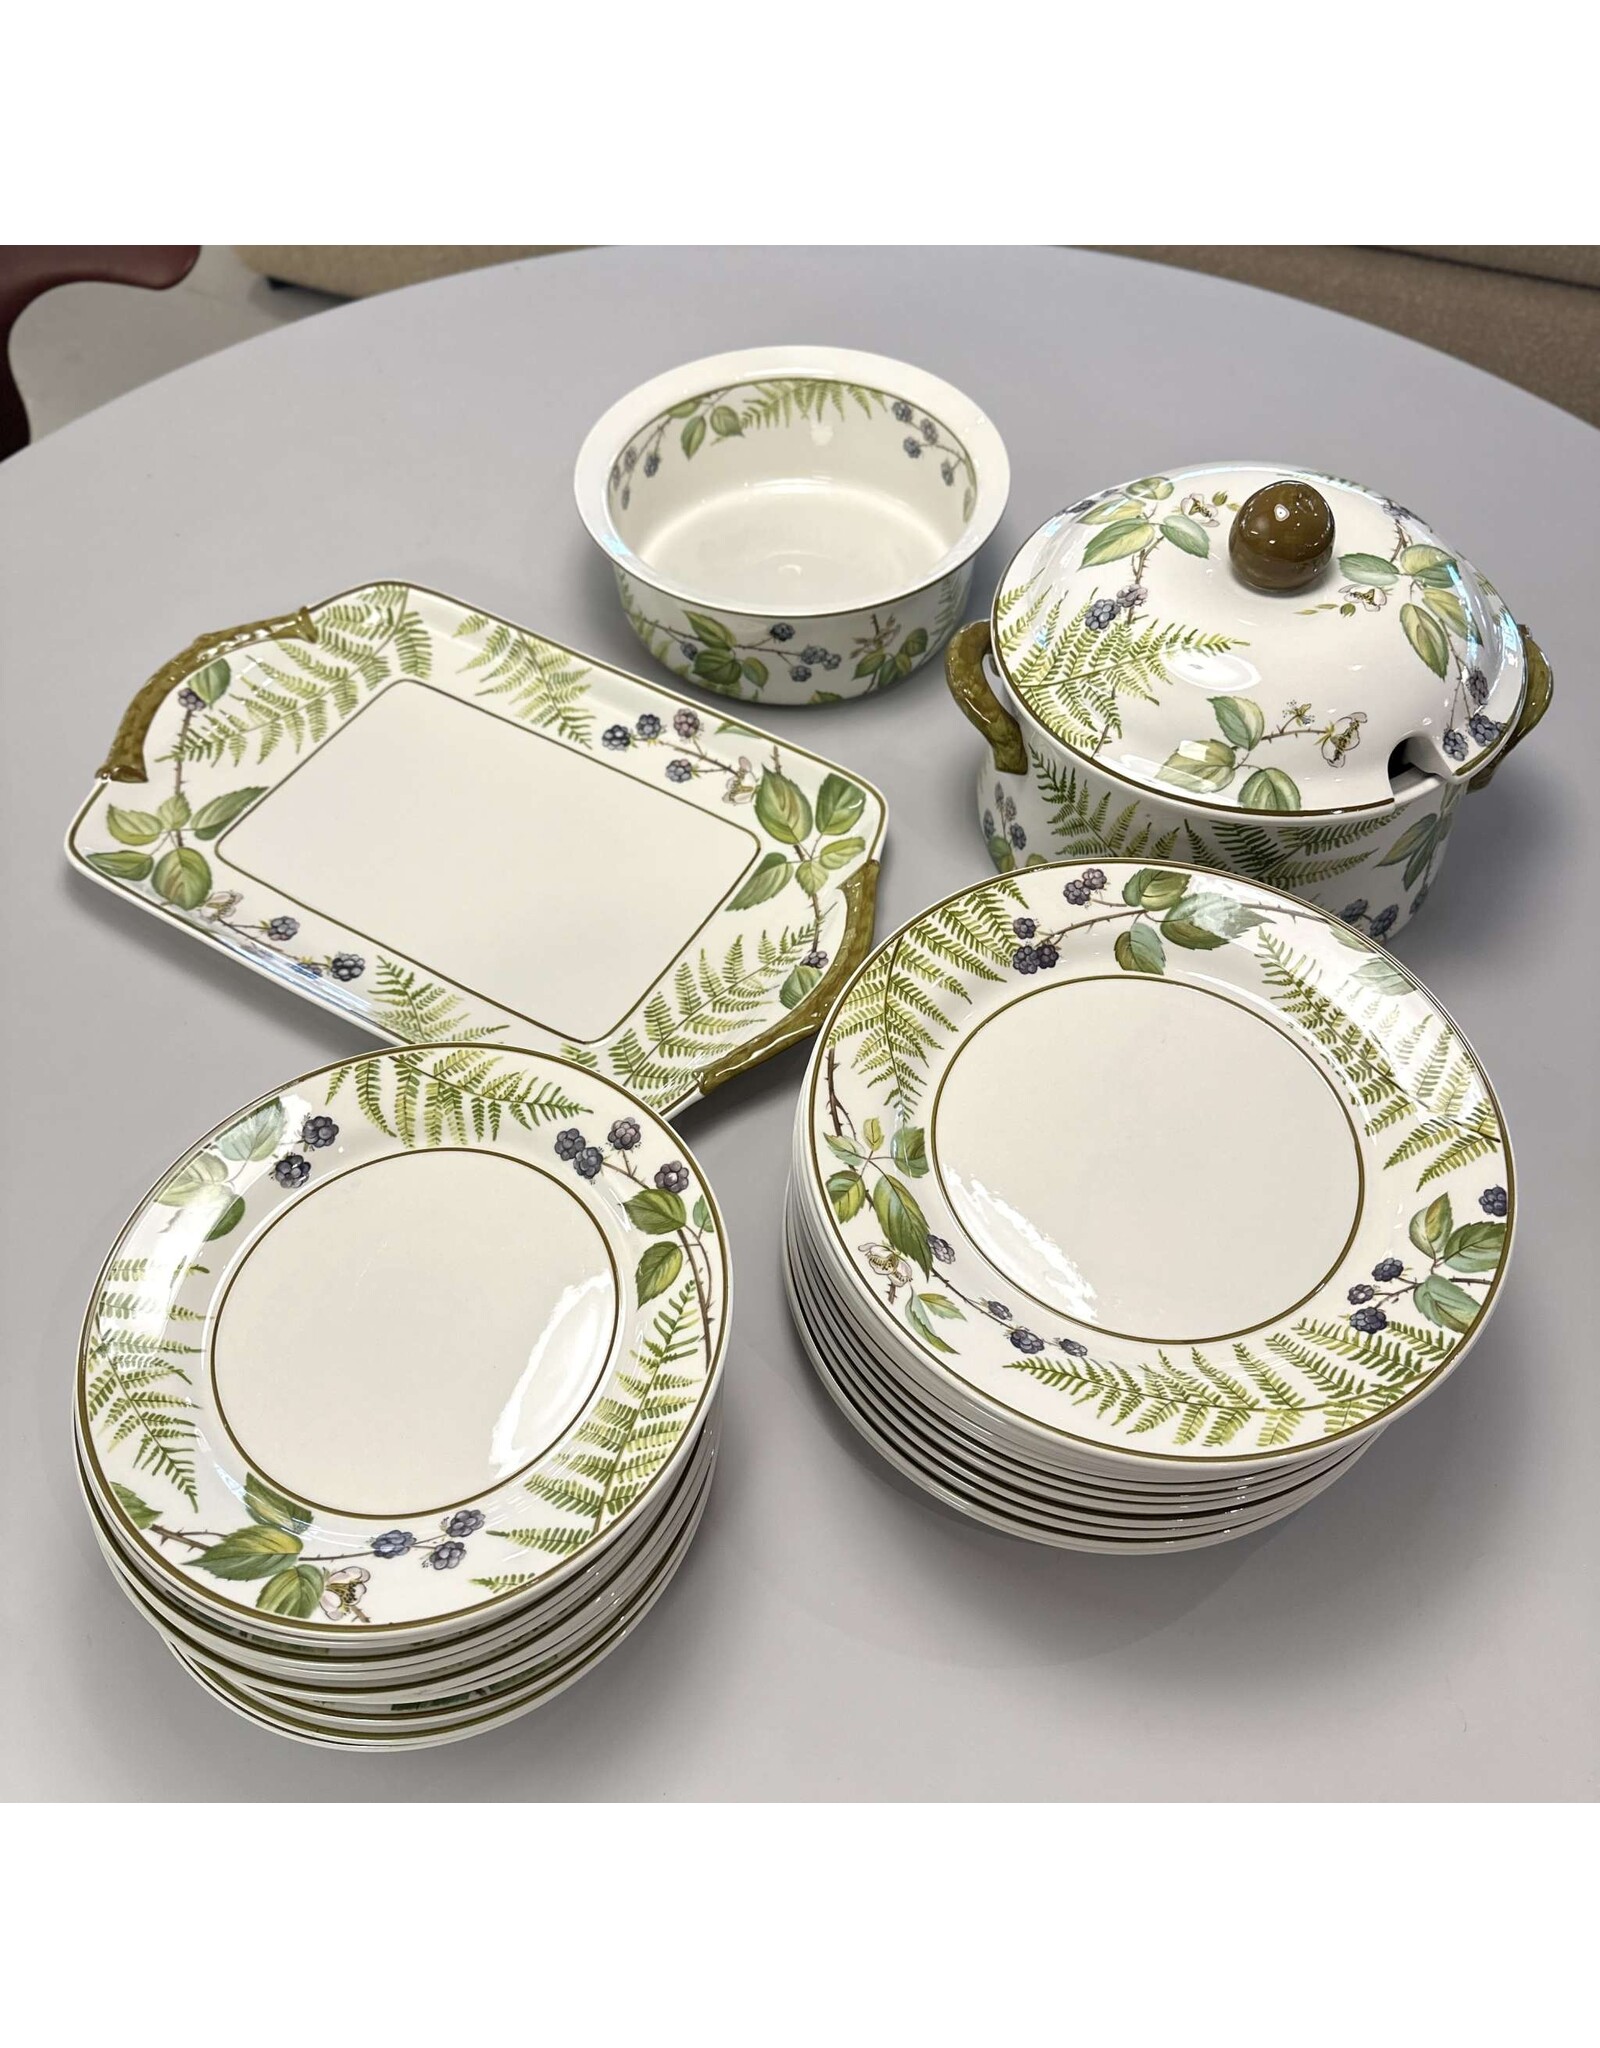 FORSA DINNERWARE SERVICE WITH BLACKBERRY MOTIF FOR 12 PERSONS